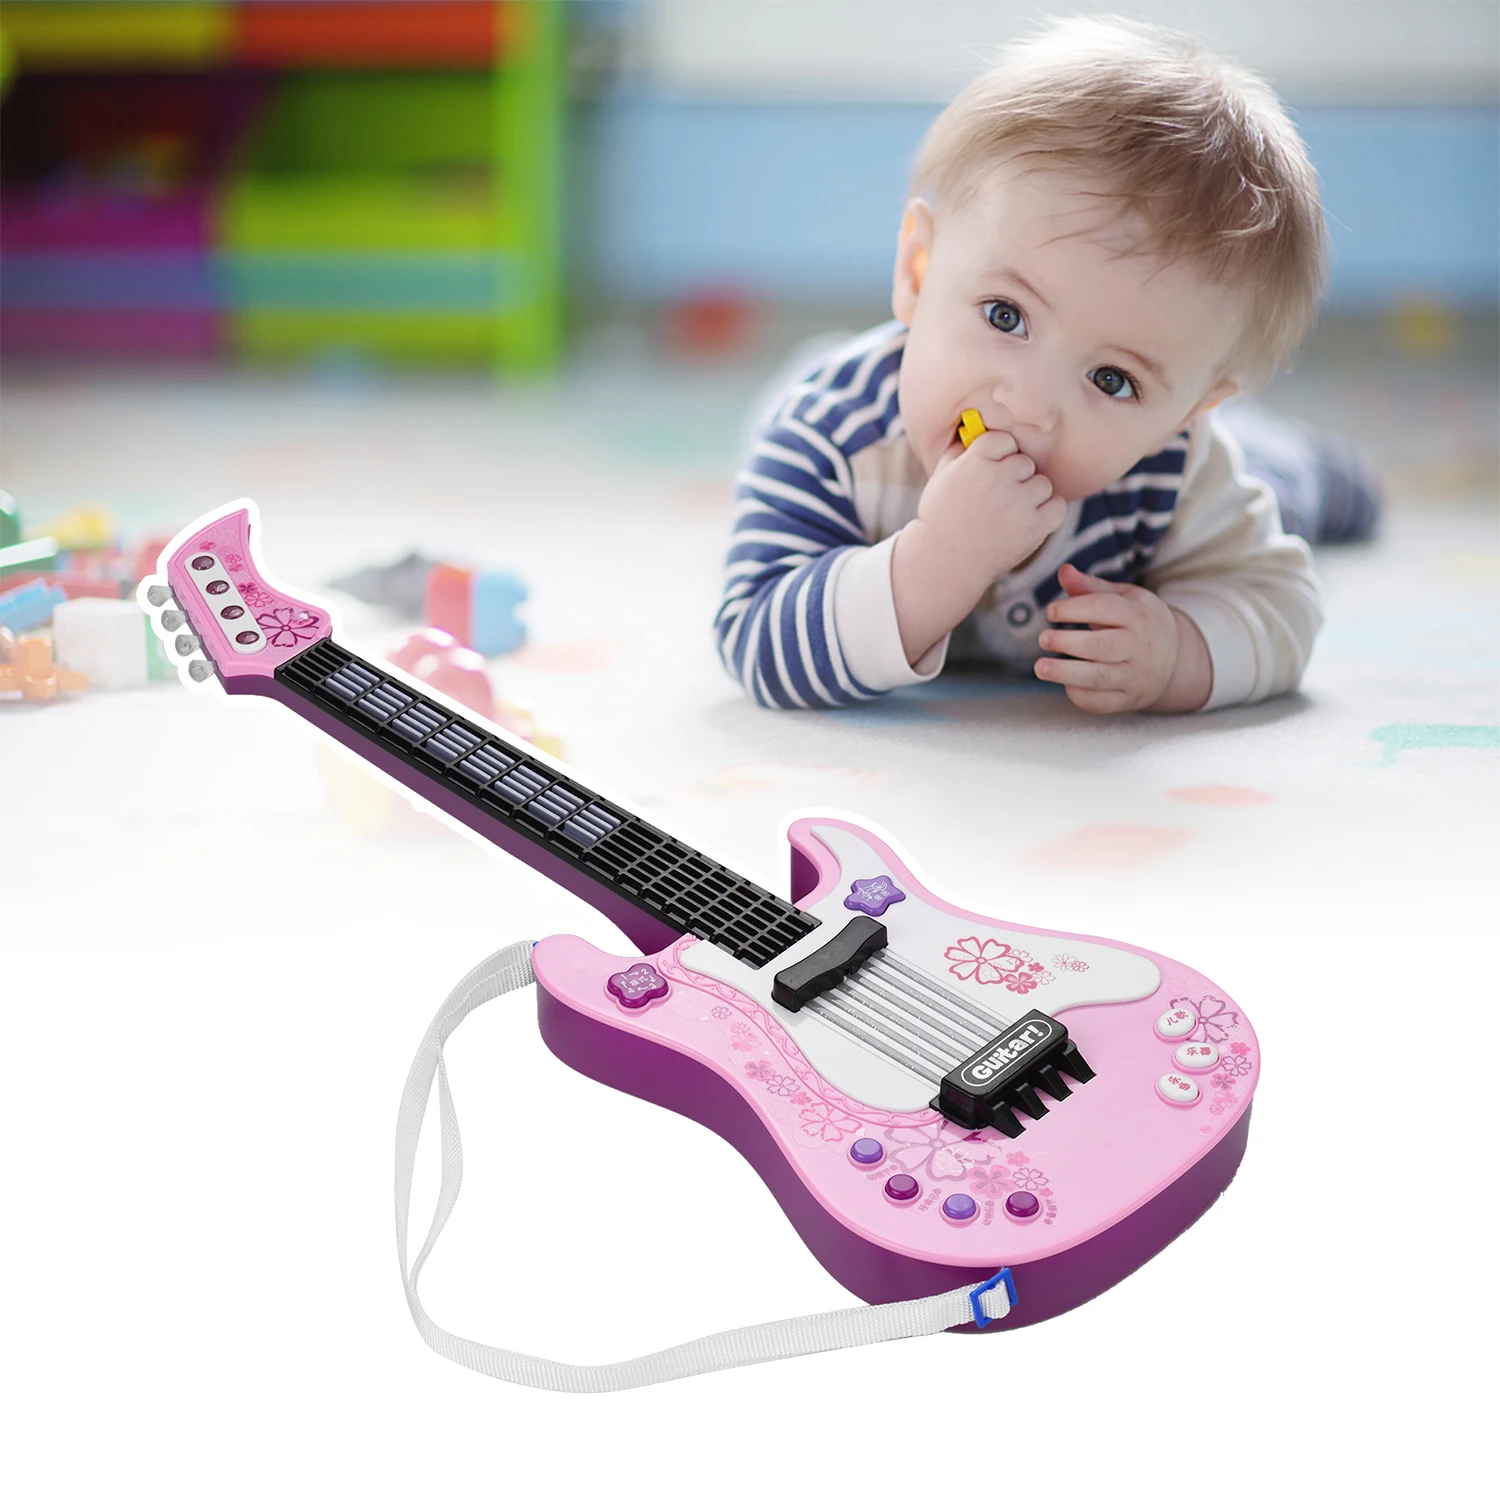 Kids Little Guitar with Rhythm Lights and Sounds Fun Educational Musical Instruments Electric Toy for Toddlers Children | Спорт и